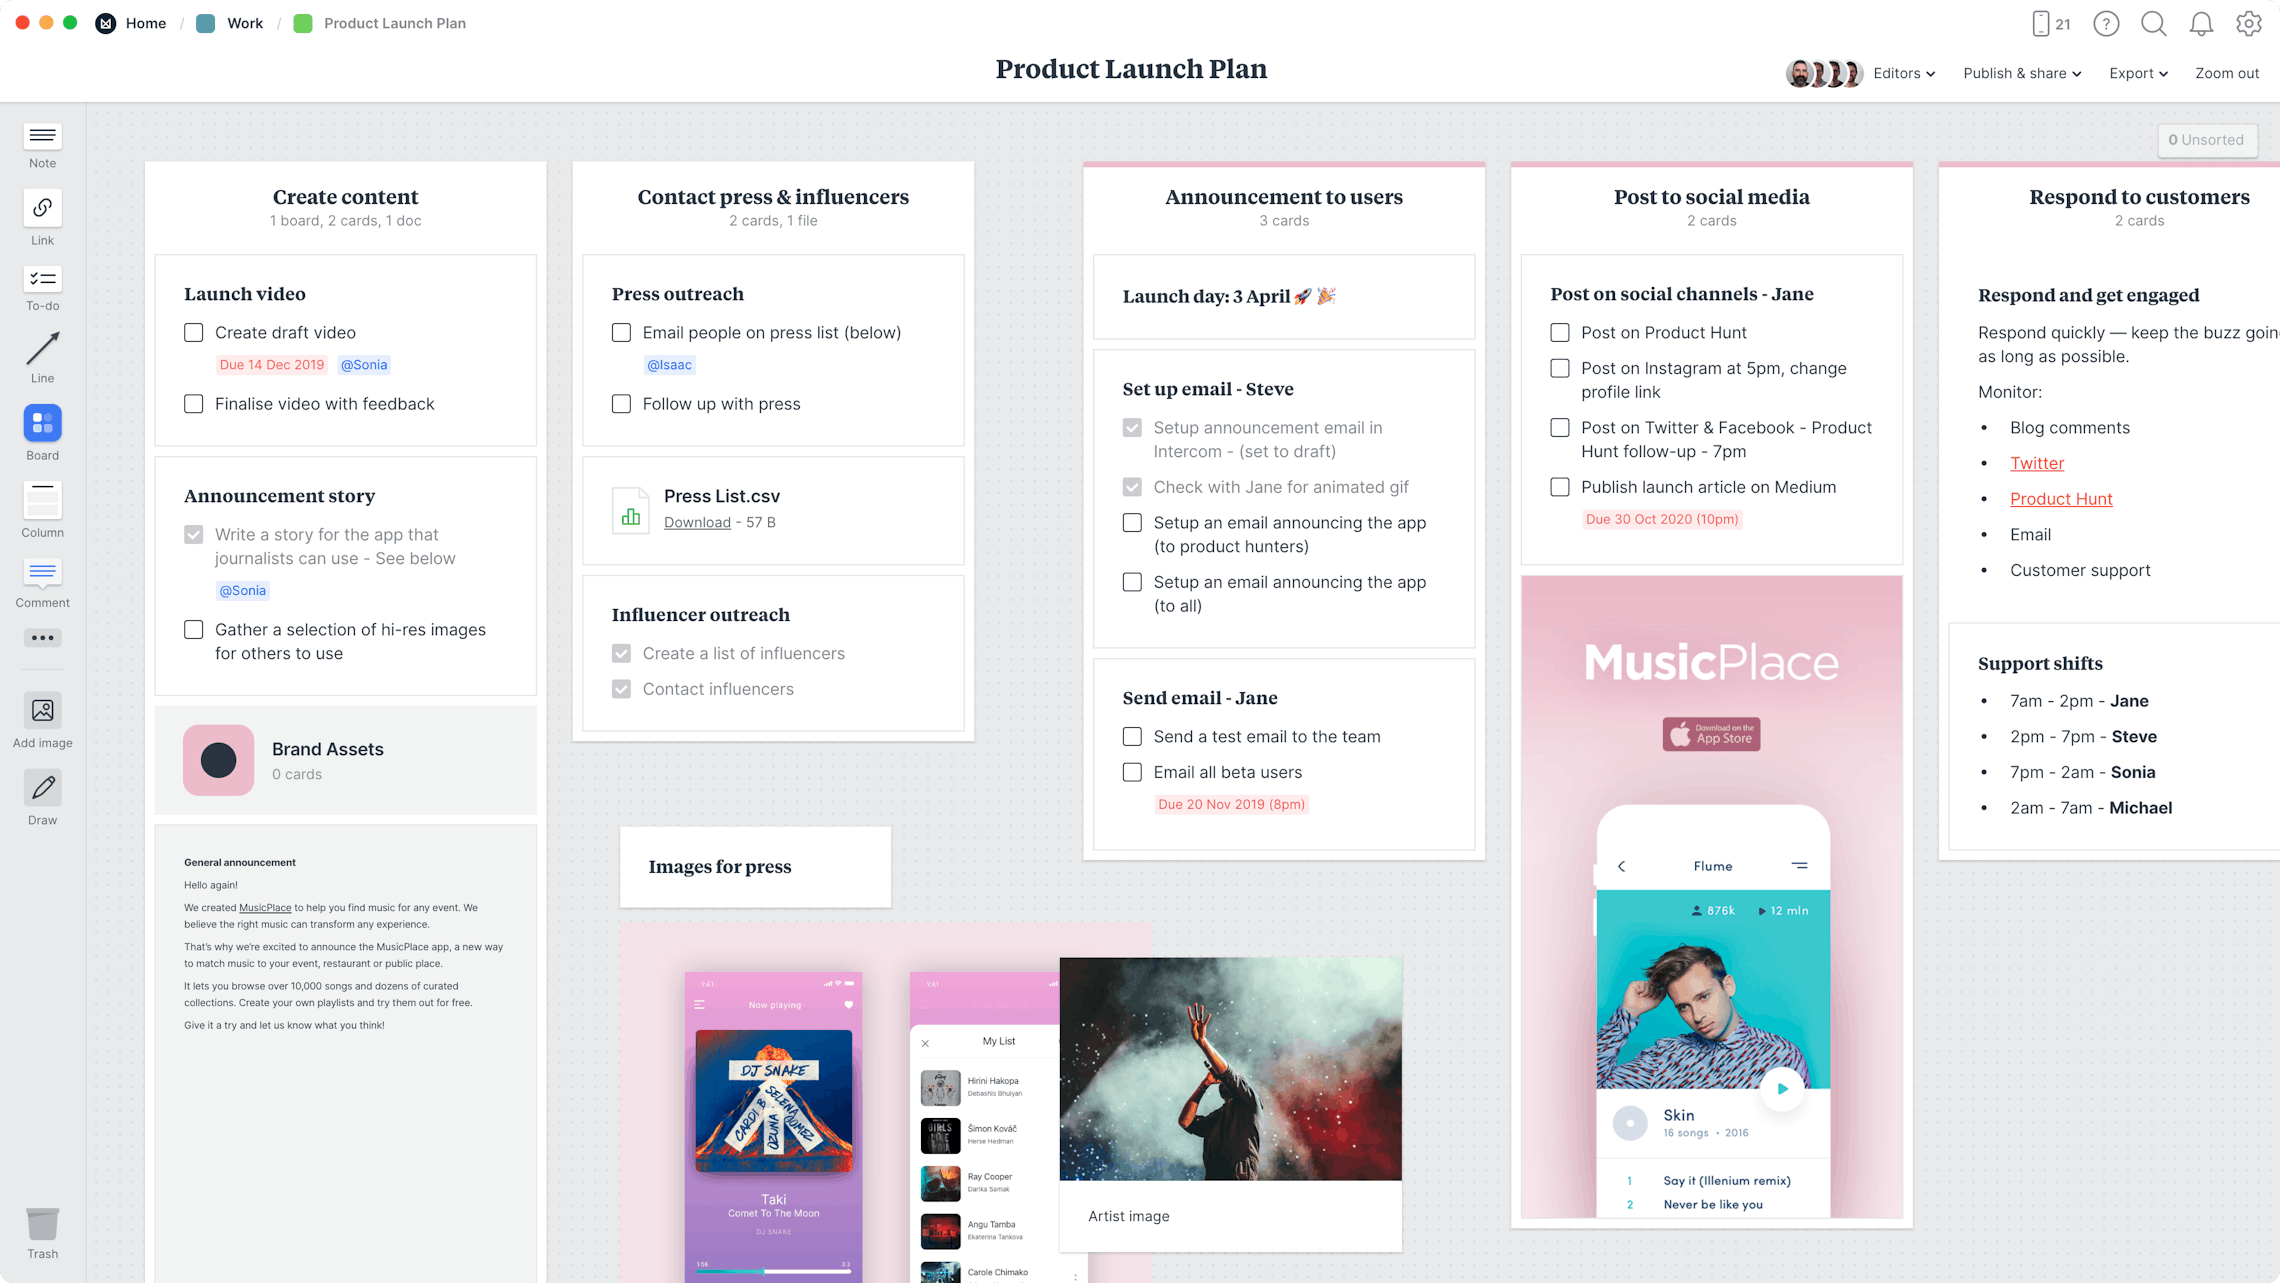 Product Launch Plan Template, within the Milanote app